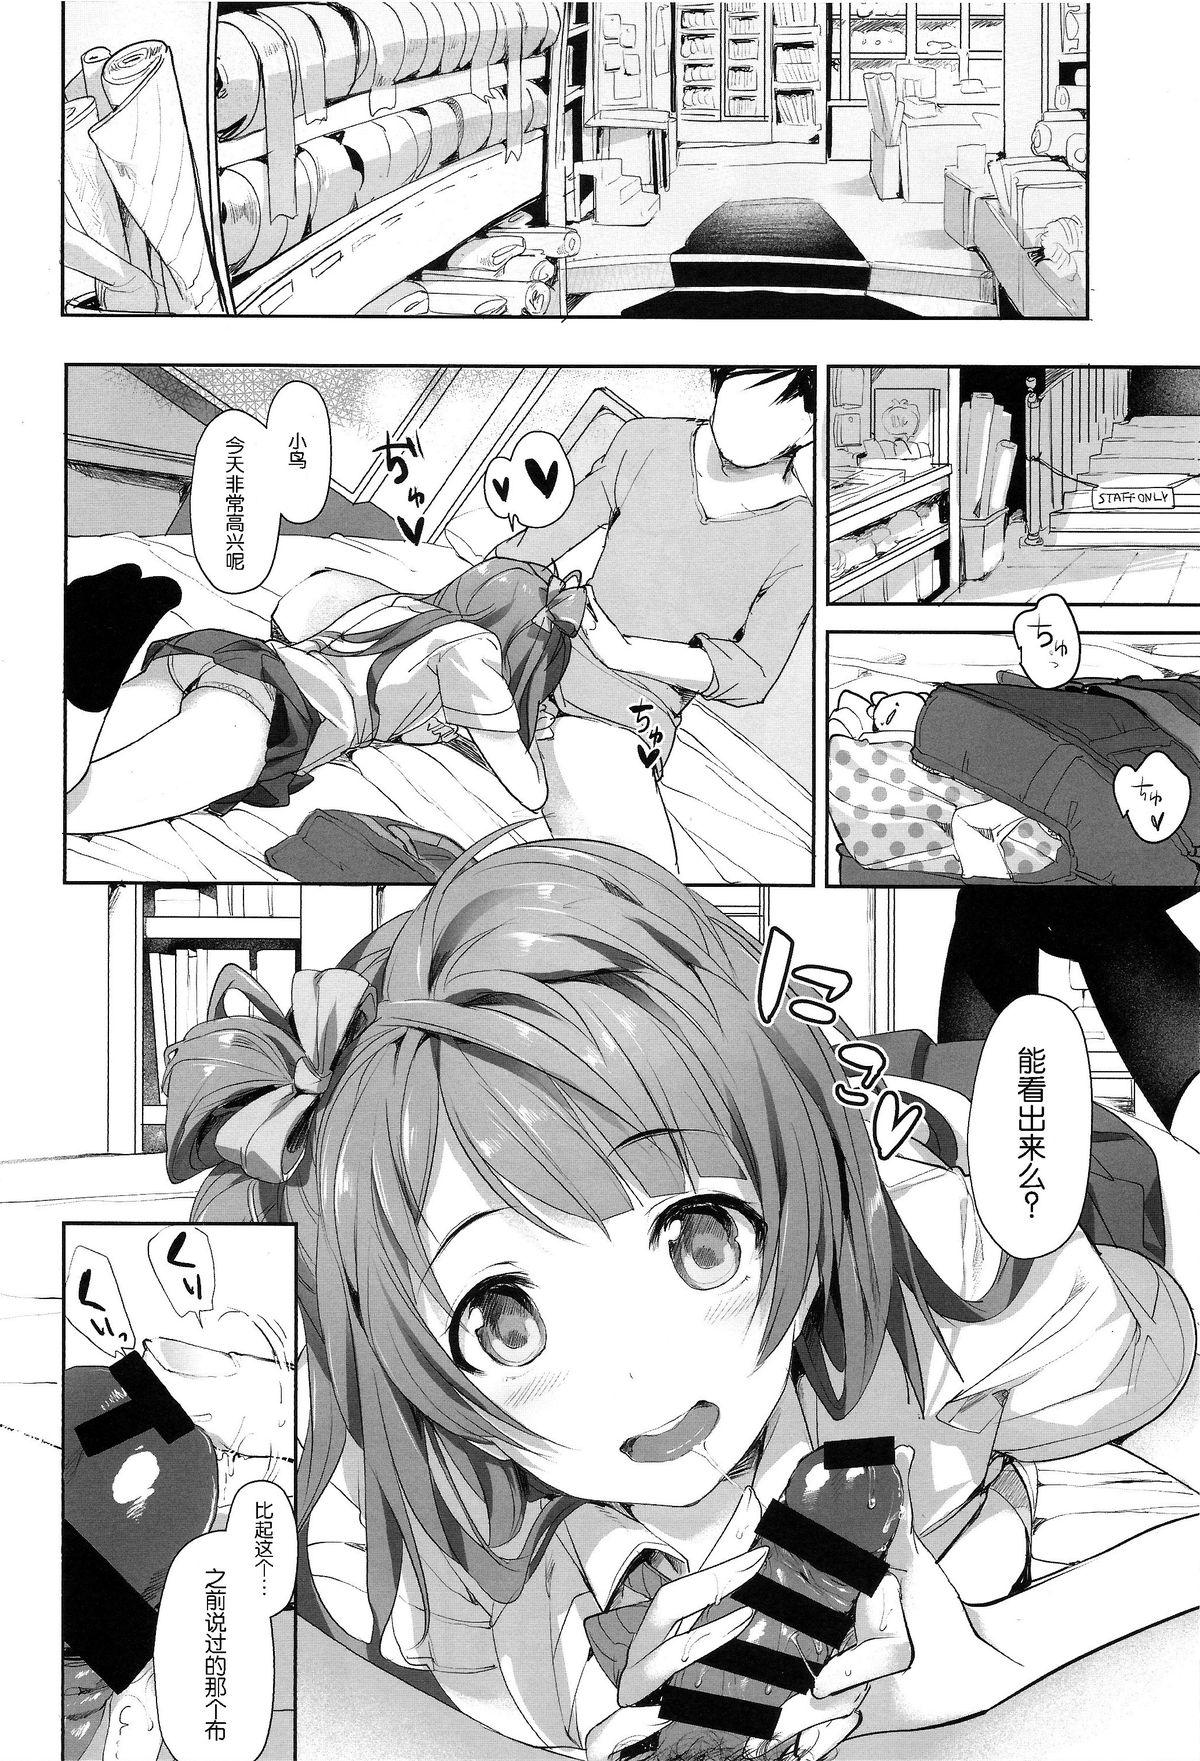 Fuck Pussy UR THE BEST! - Love live Footjob - Page 4